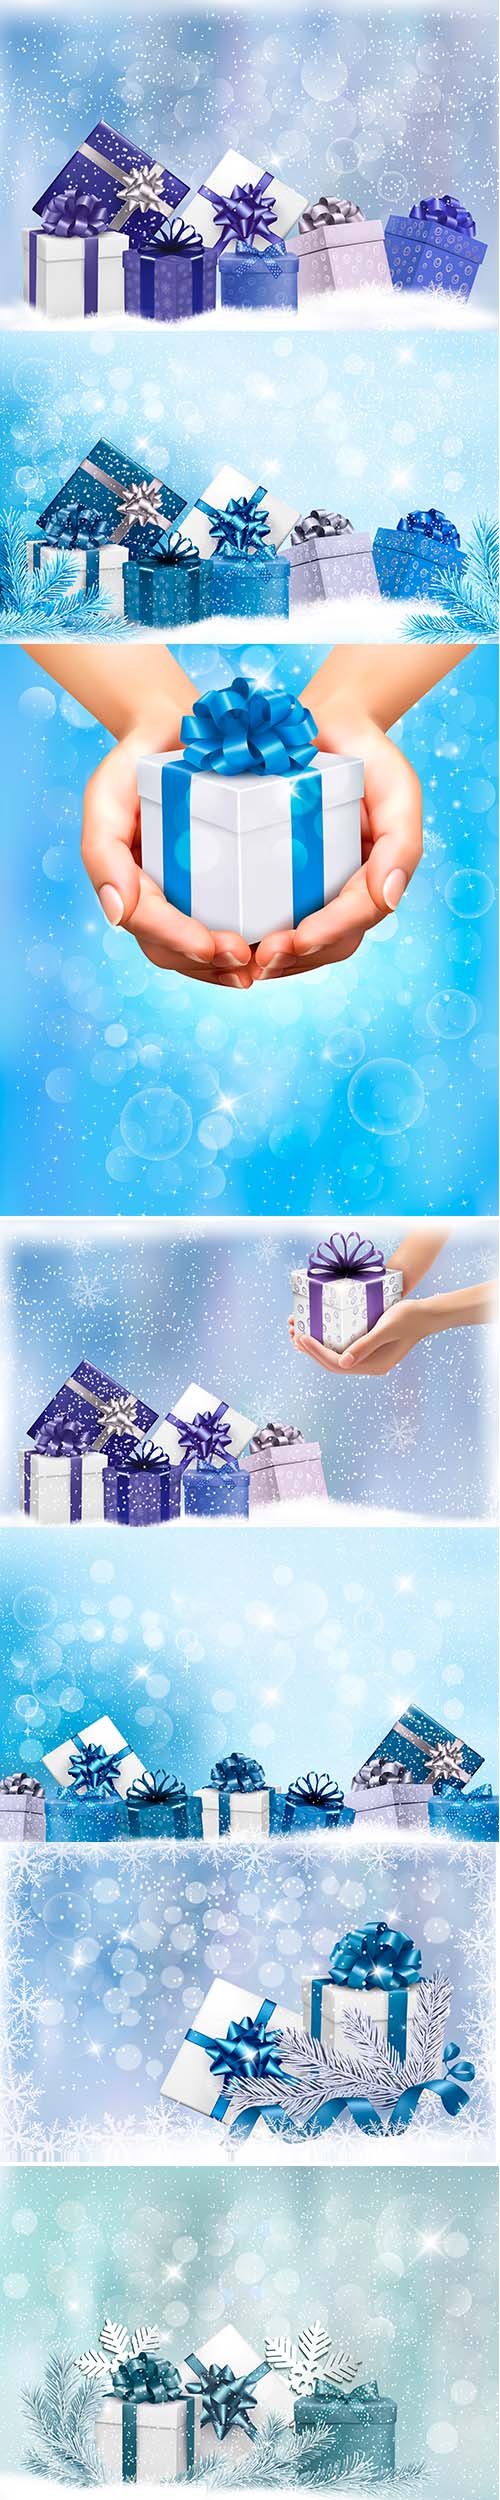 Christmas blue background with gift boxes snowflake